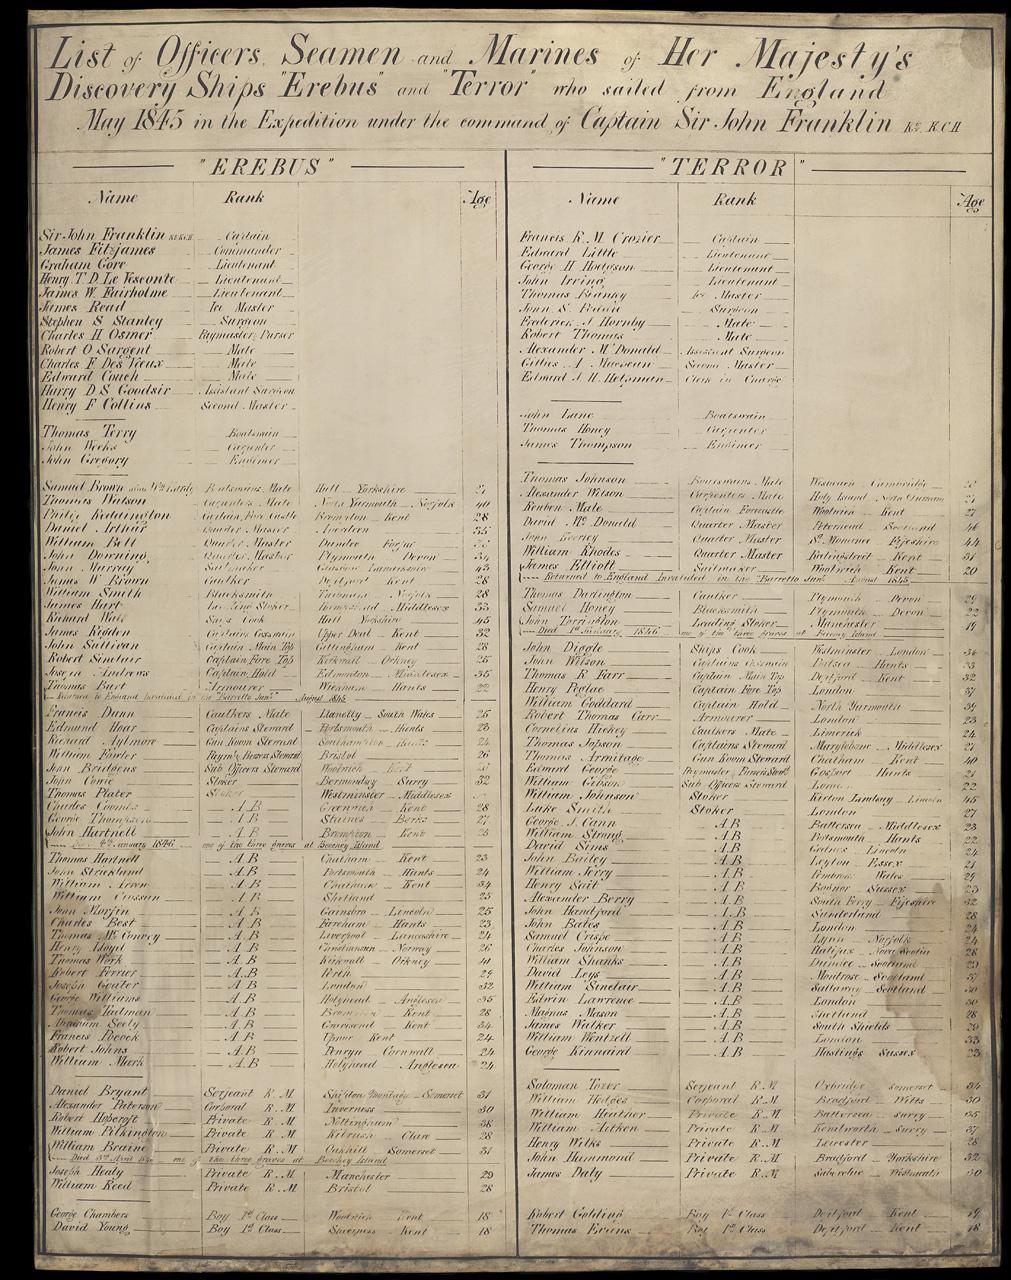 List of officers and men from HMS 'Erebus', dated 1845